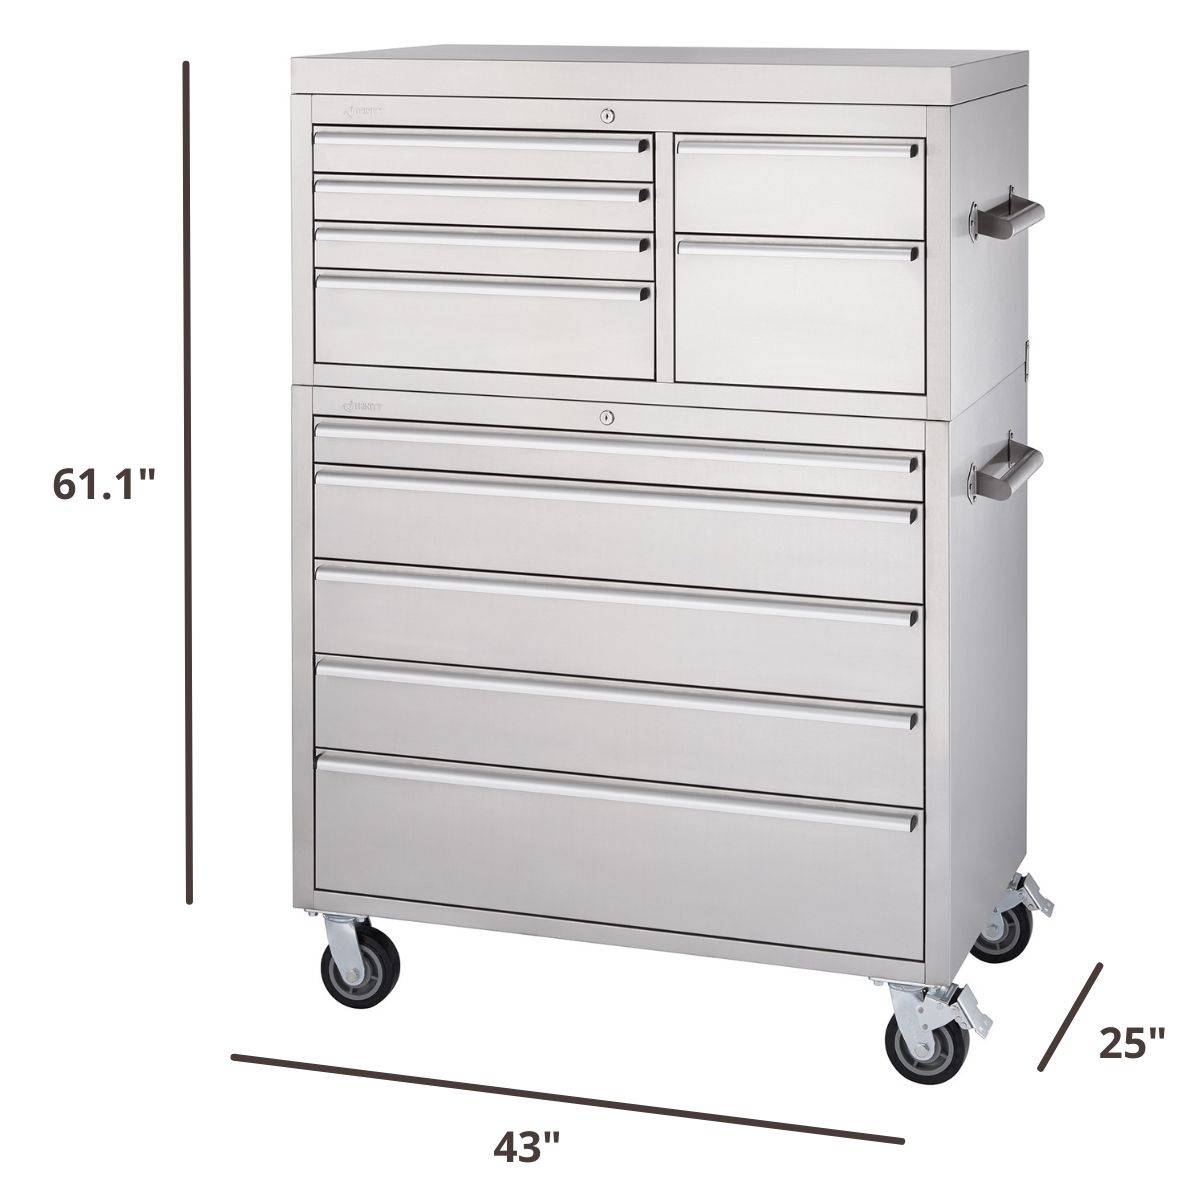 61 inches tall by 43 inches wide by 25 inches deep tool chest